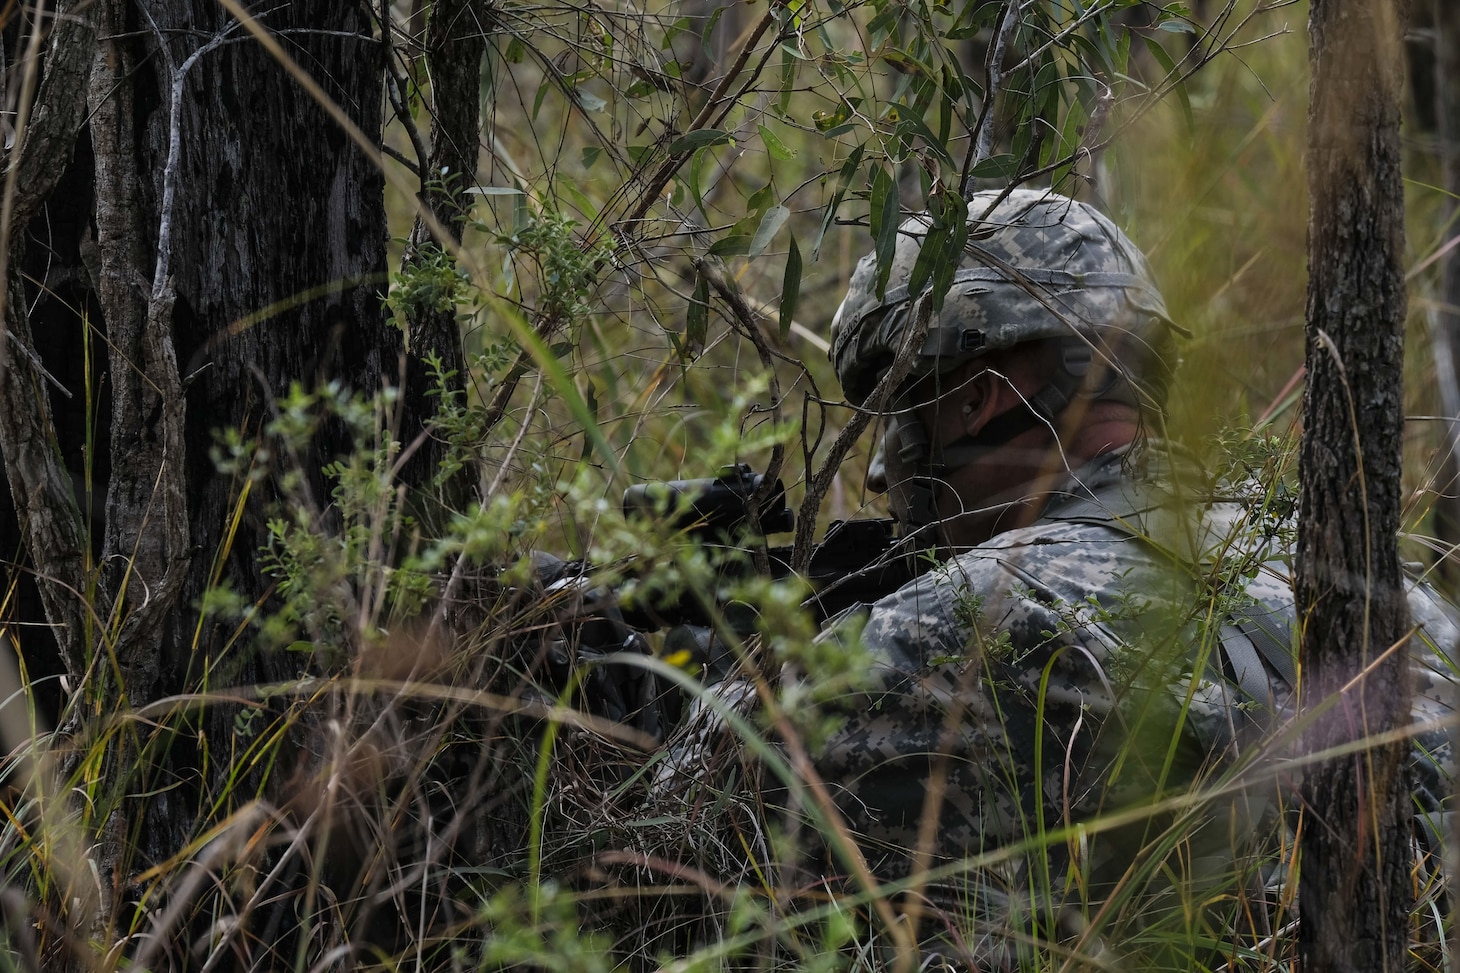 A paratrooper with 4th Infantry Brigade Combat Team (Airborne), 25th Infantry Division, pulls security in Shoalwater Bay, Queensland, Australia, July 13. In addition to watching for opposing forces, the Arctic Paratroopers needed to watch out for local snakes, spiders, kangaroos, mosquitos, crocodiles, airborne koala bears and ticks, all of which can be lethal. (U.S. Army photo by Staff Sgt. Daniel Love)